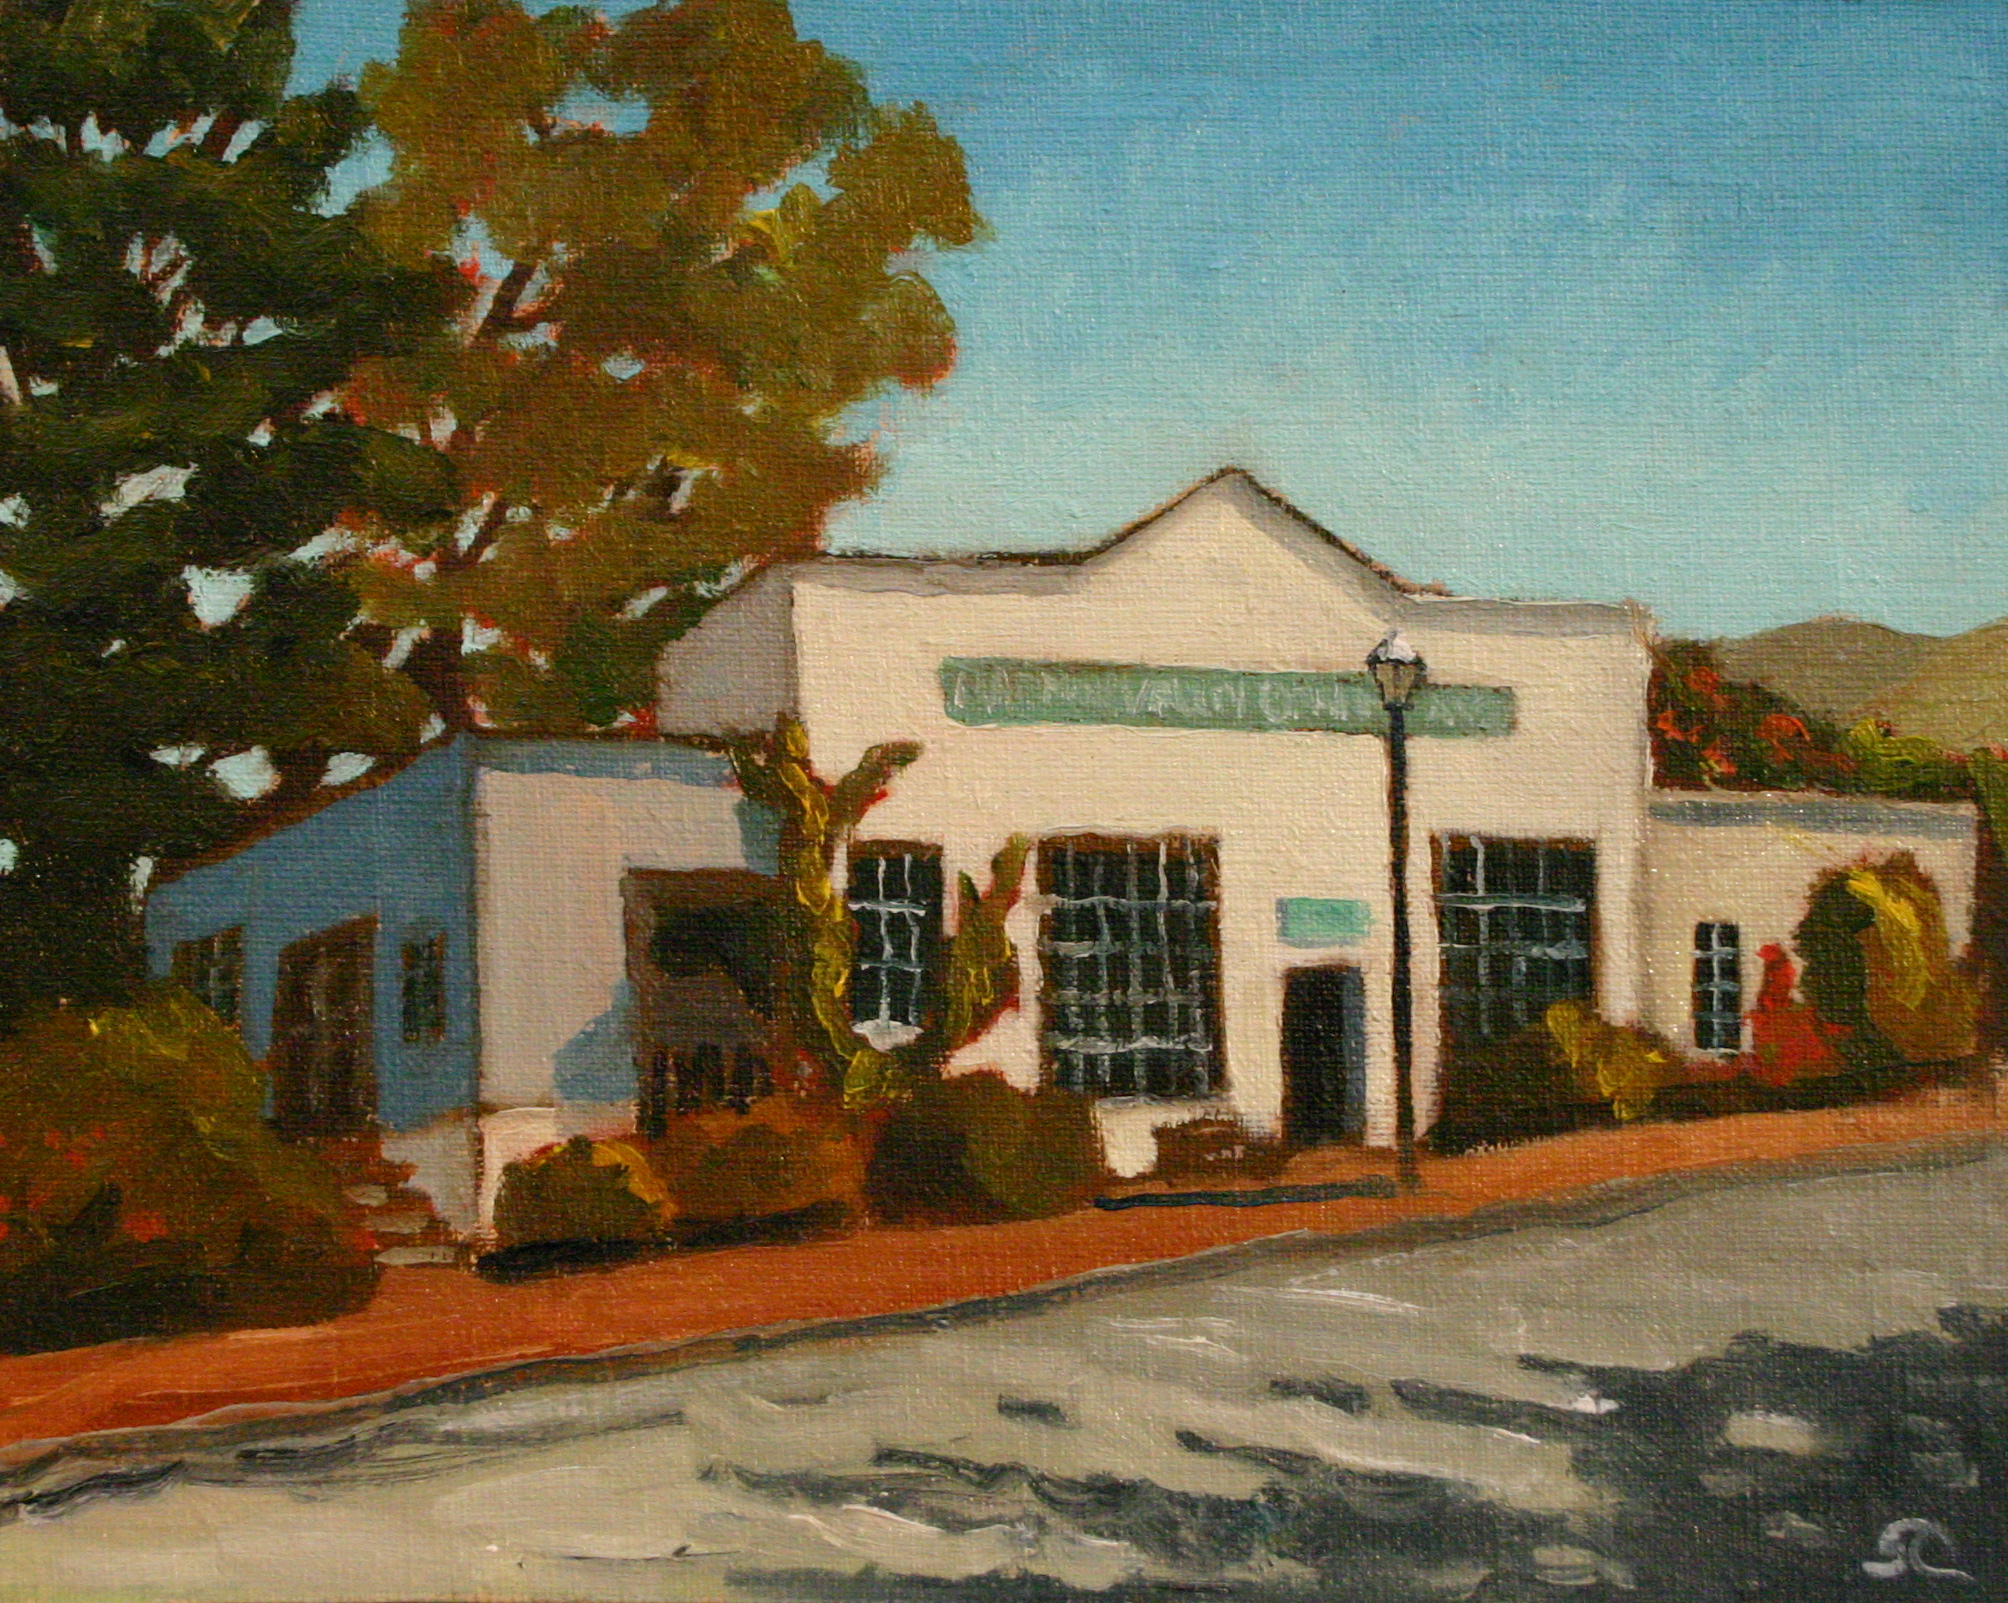 "Harmony Post Office" oil on canvas 8 x 10 sold